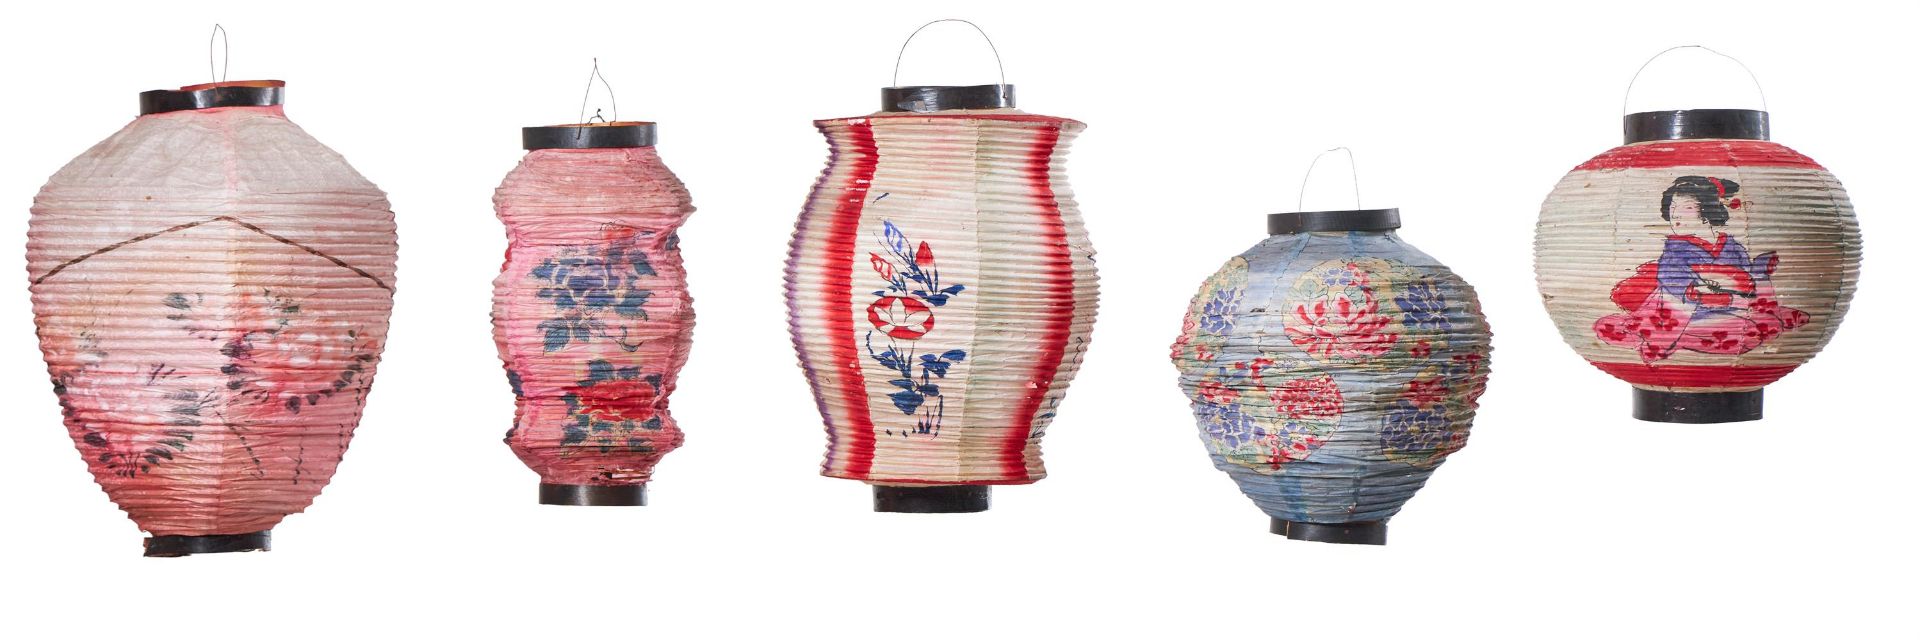 A LARGE COLLECTION OF JAPANESE PAPER LANTERNS, MID/EARLY 20TH CENTURY - Image 3 of 3